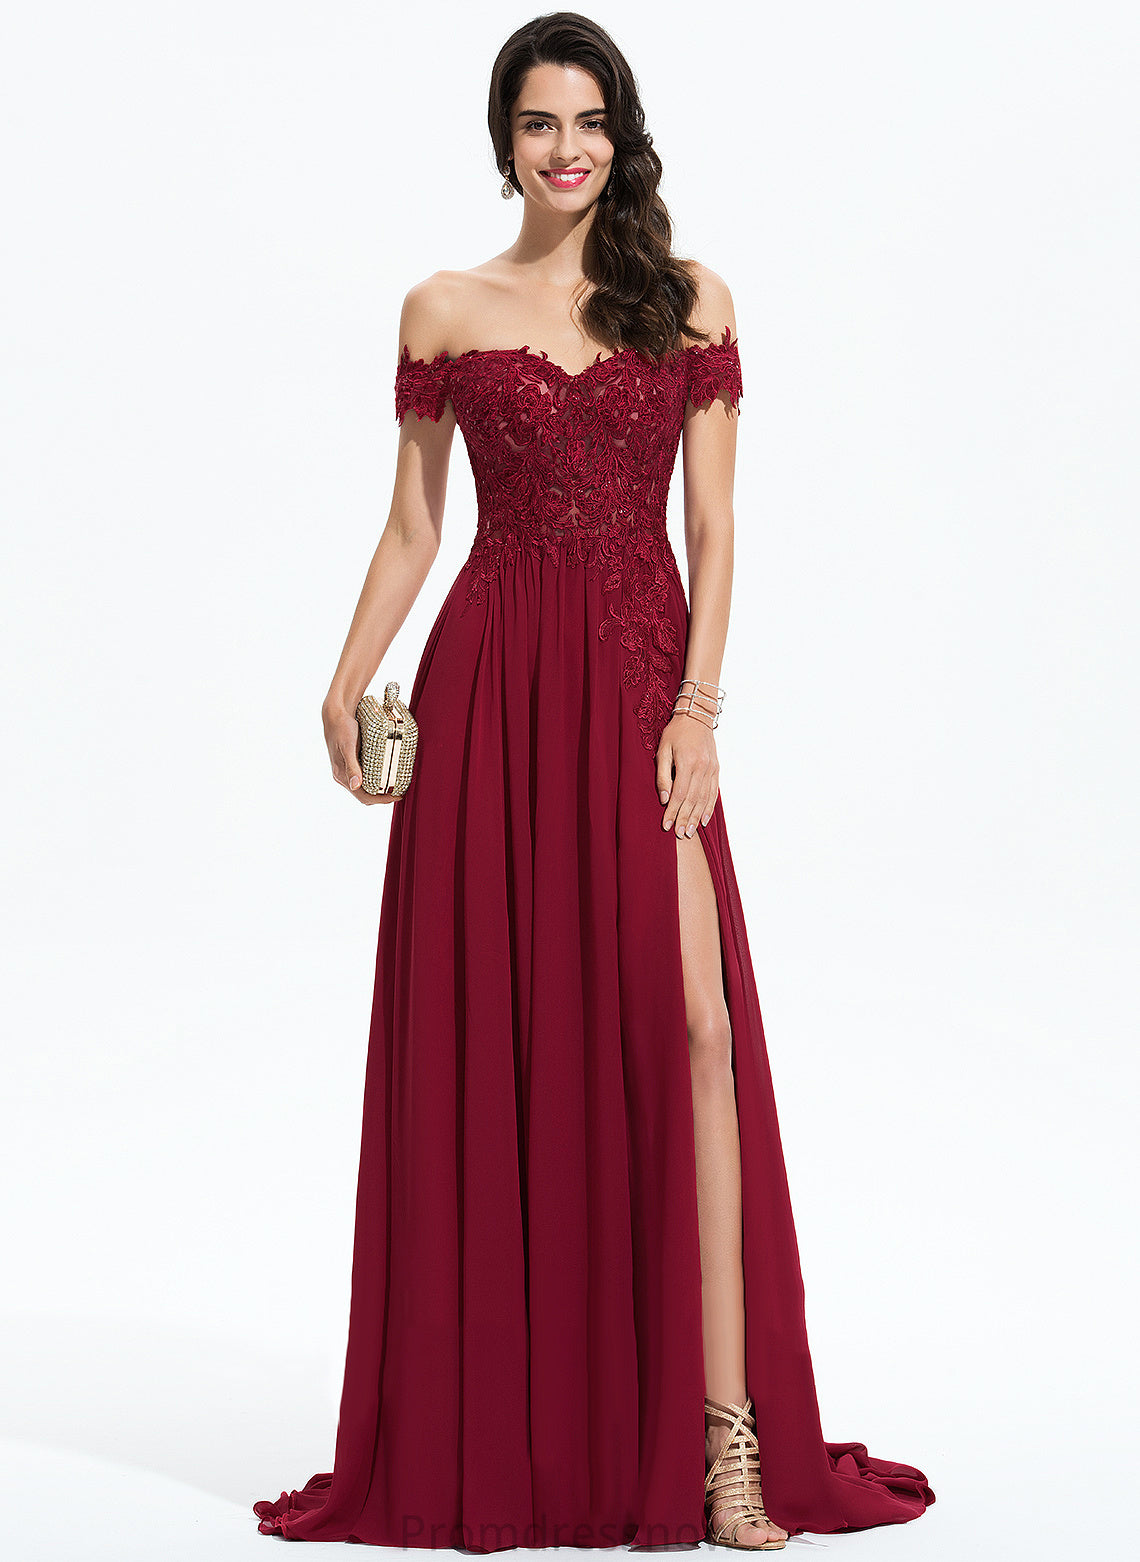 Natalie A-Line Prom Dresses Off-the-Shoulder Lace Sweep Sequins Chiffon Train With